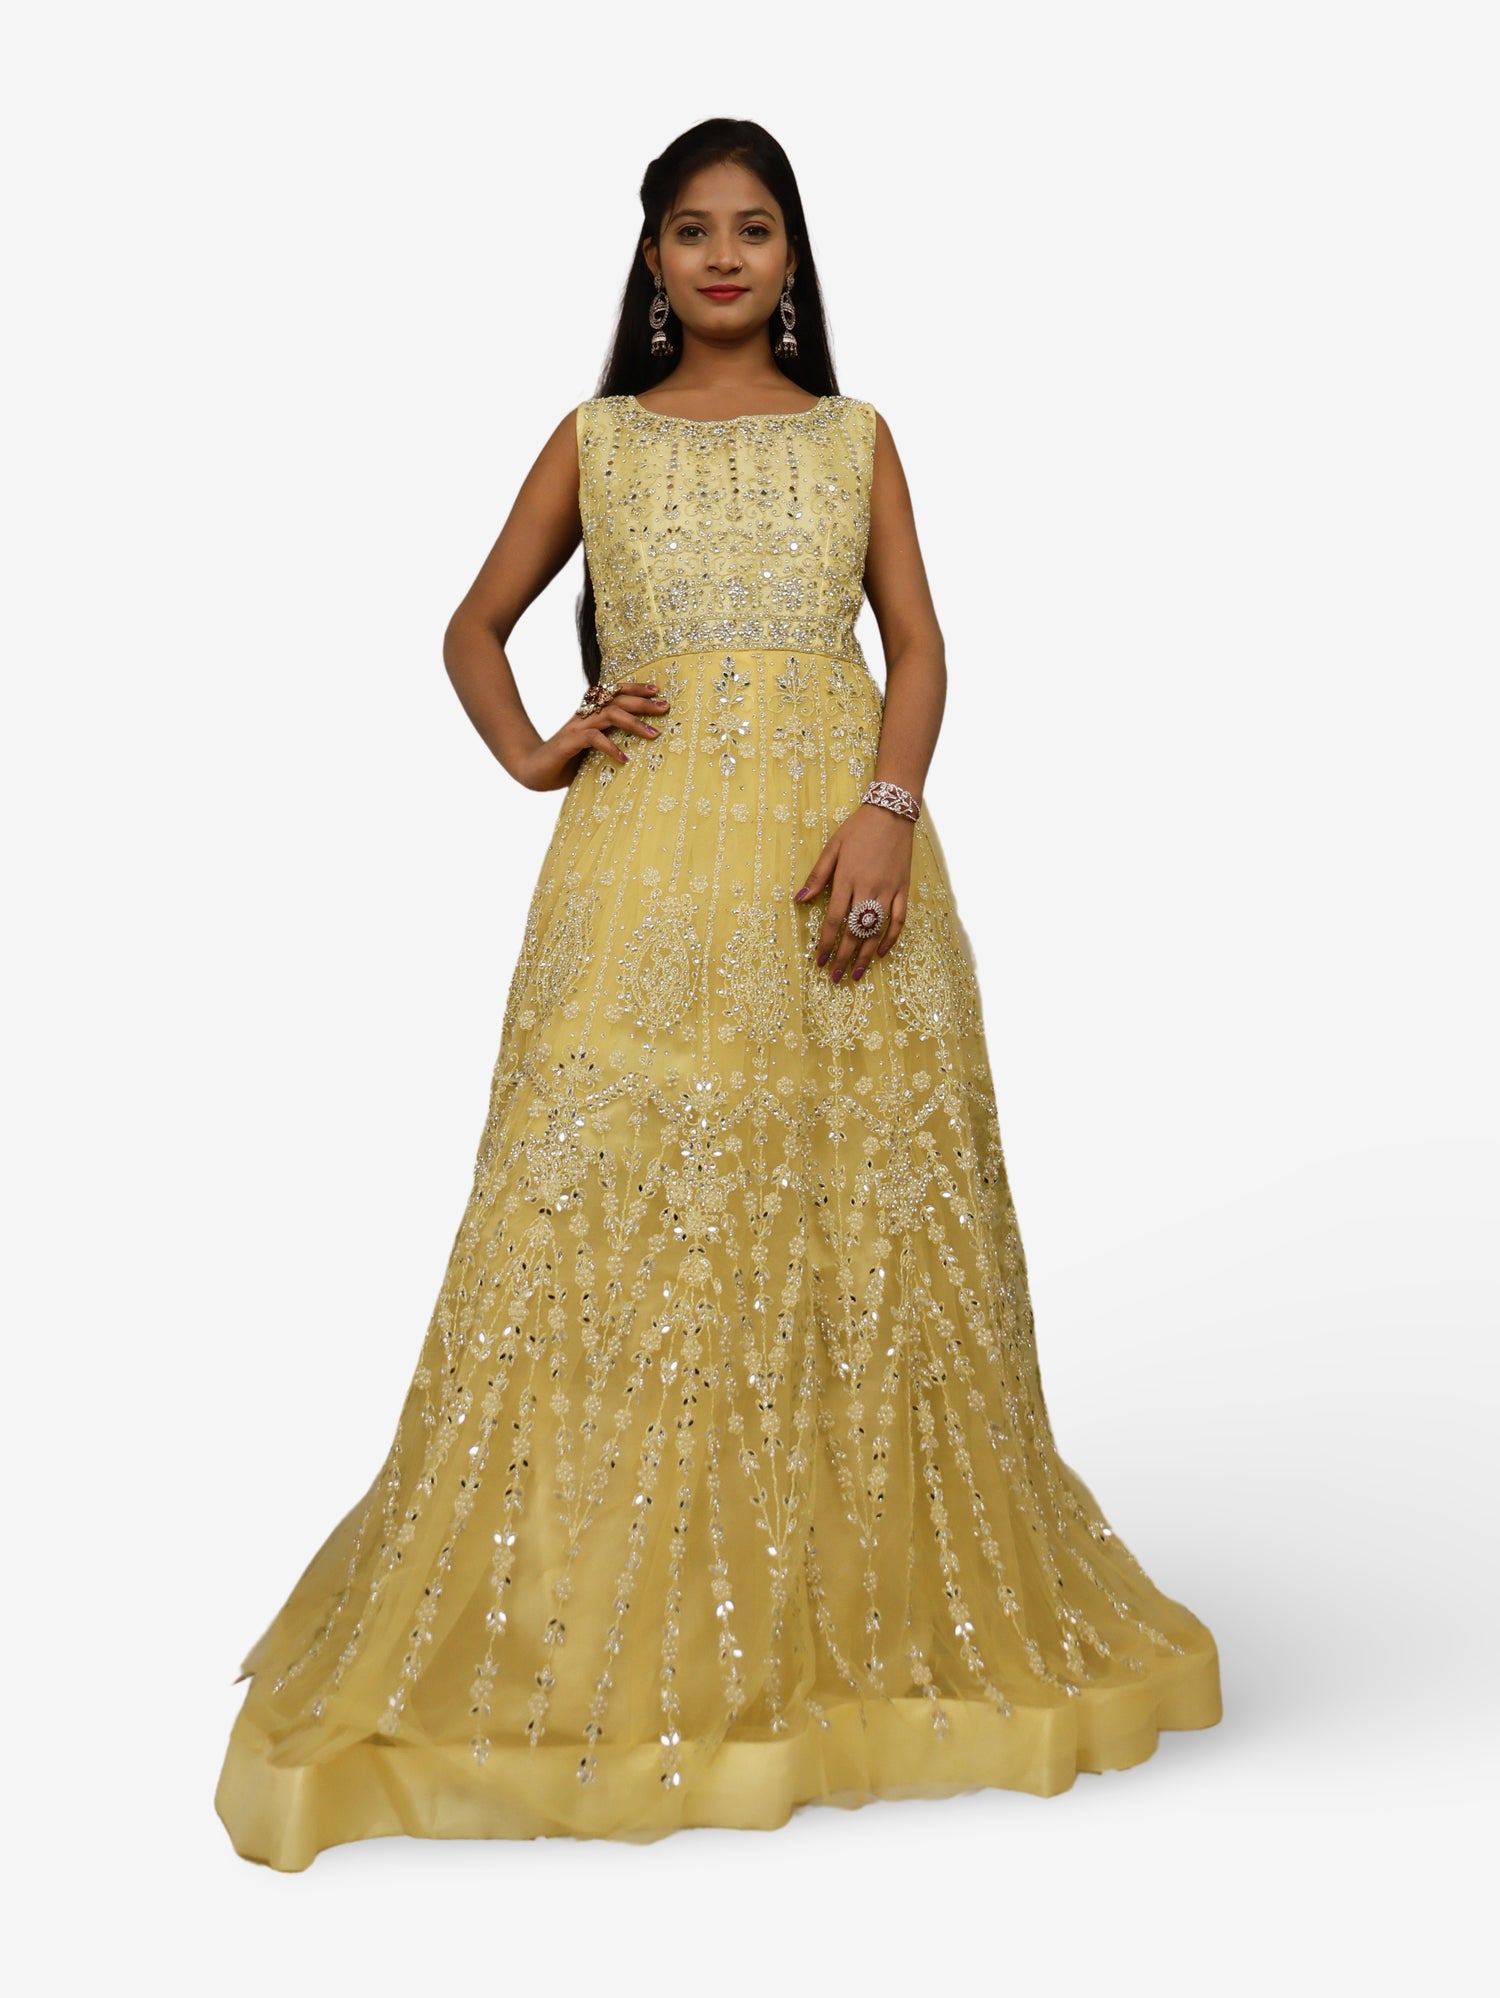 Net Fabric Gown with Pearl &amp; Embroidery by Shreekama Lemon Yellow Designer Gowns for Party Festival Wedding Occasion in Noida